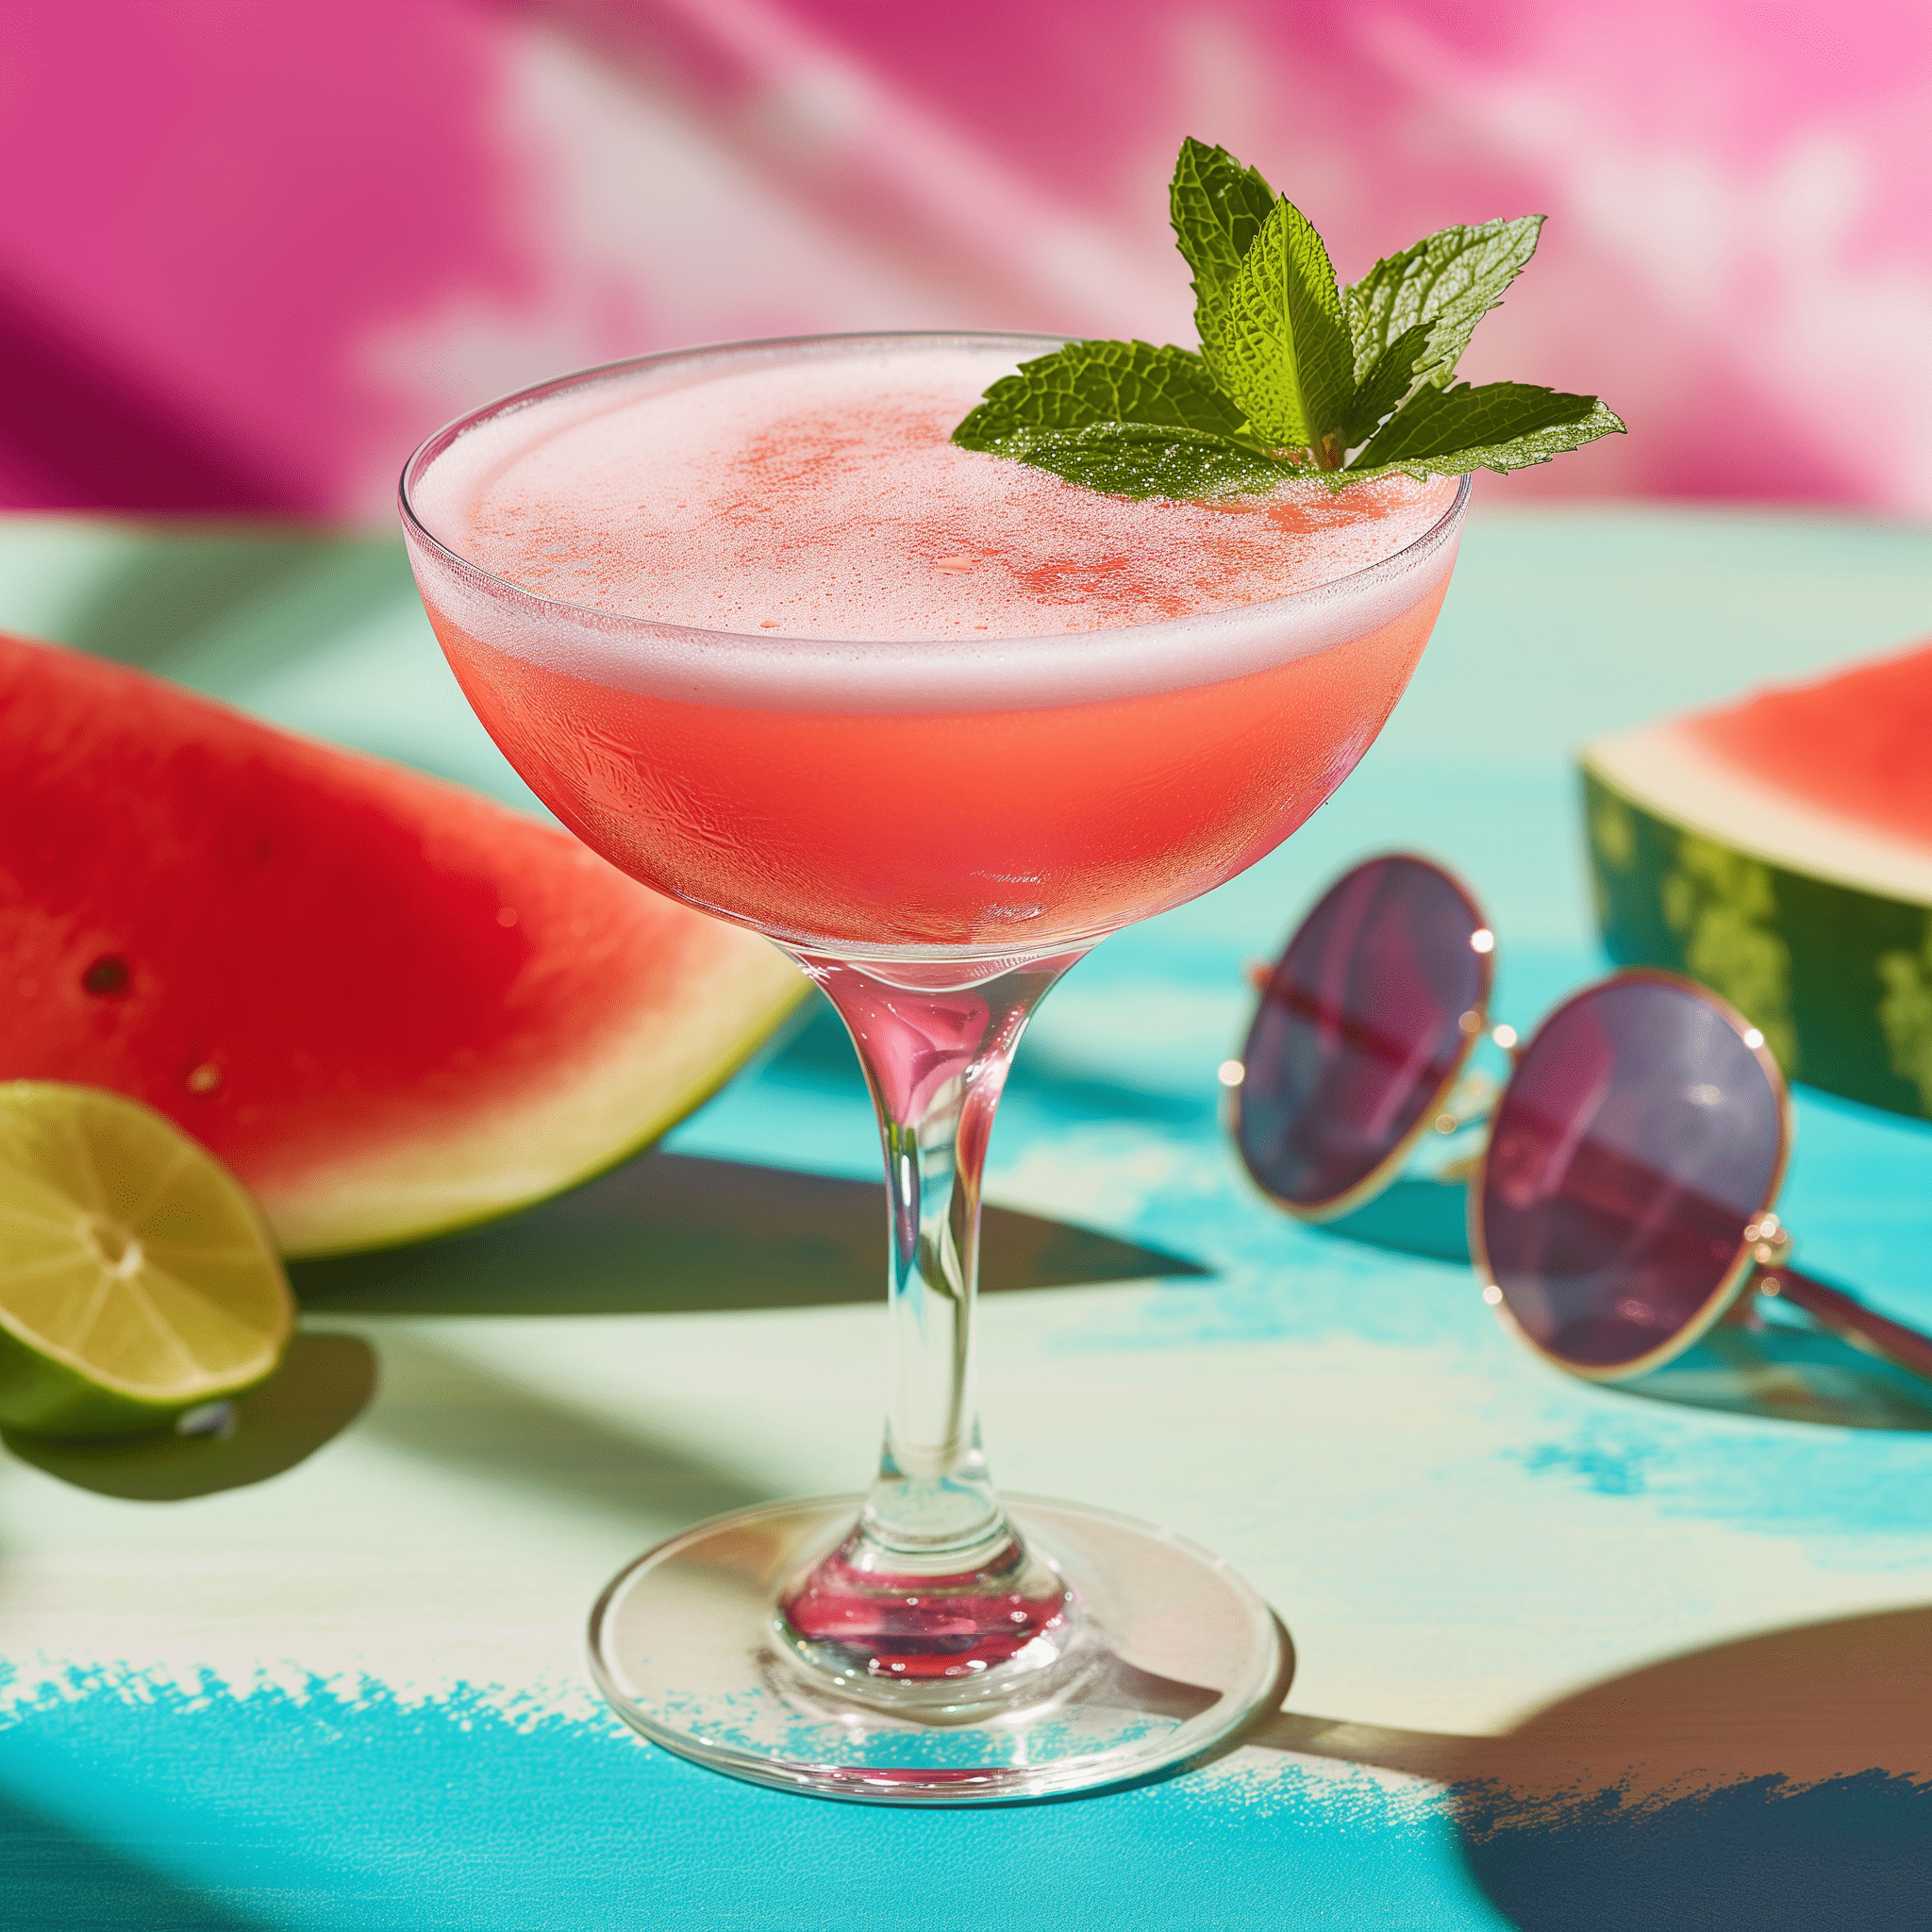 Watermelon Cooler Mocktail Recipe - The Watermelon Cooler Mocktail has a delightful balance of sweet and tangy flavors. The watermelon provides a juicy, fruity base, while the lime juice adds a refreshing citrus note. The agave syrup sweetens the drink just enough without overpowering, and the mint gives it an aromatic freshness.